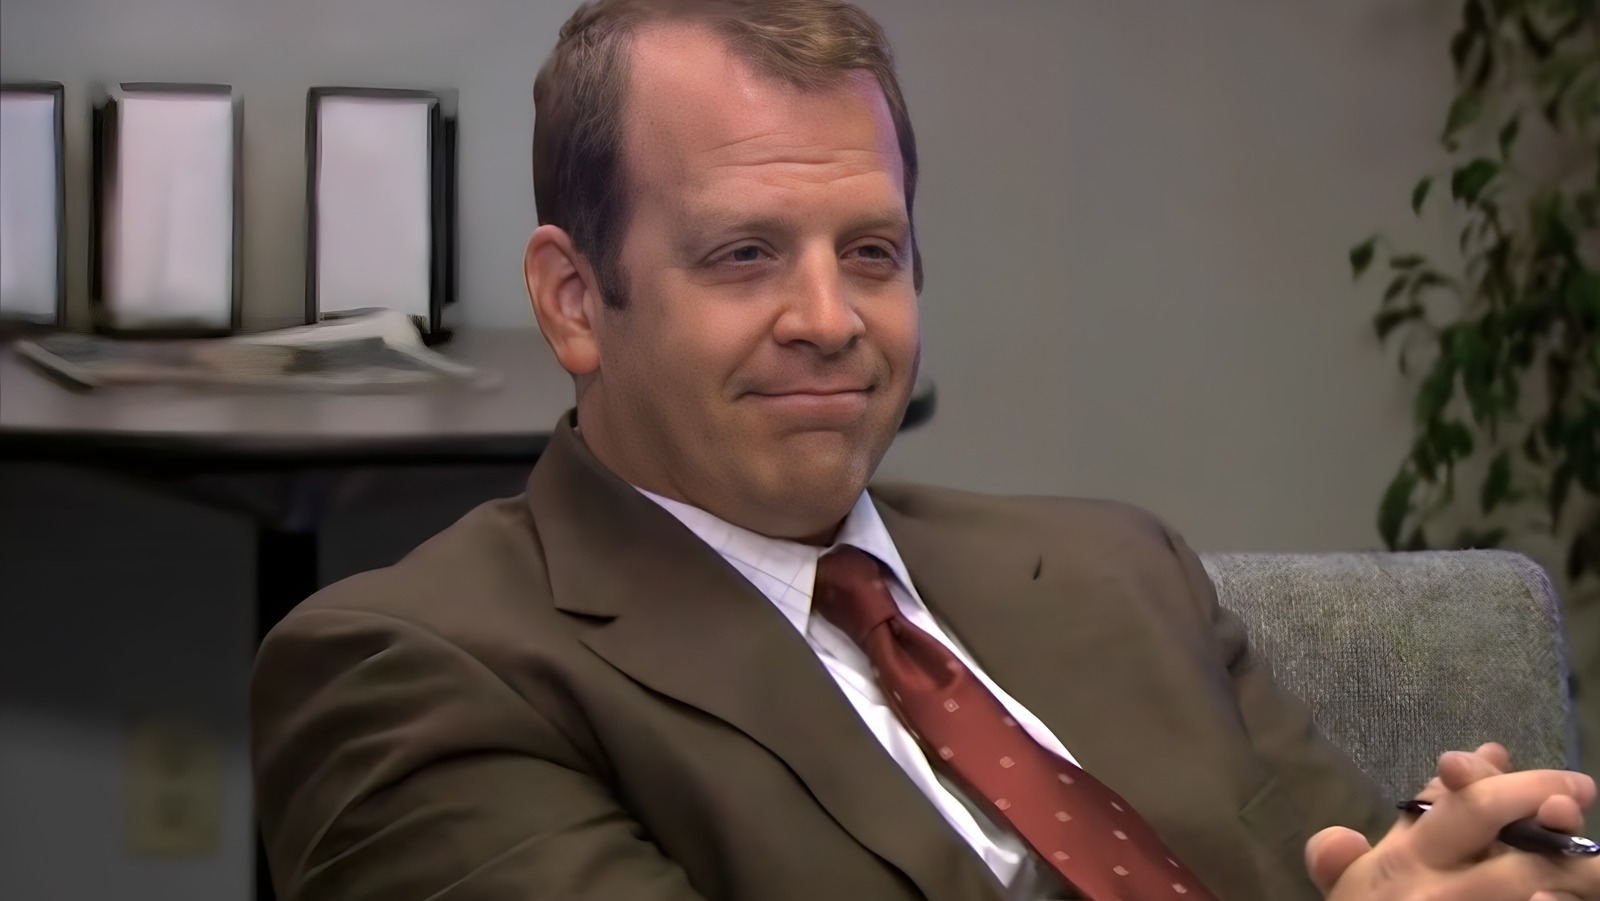 Toby Flenderson from The Office